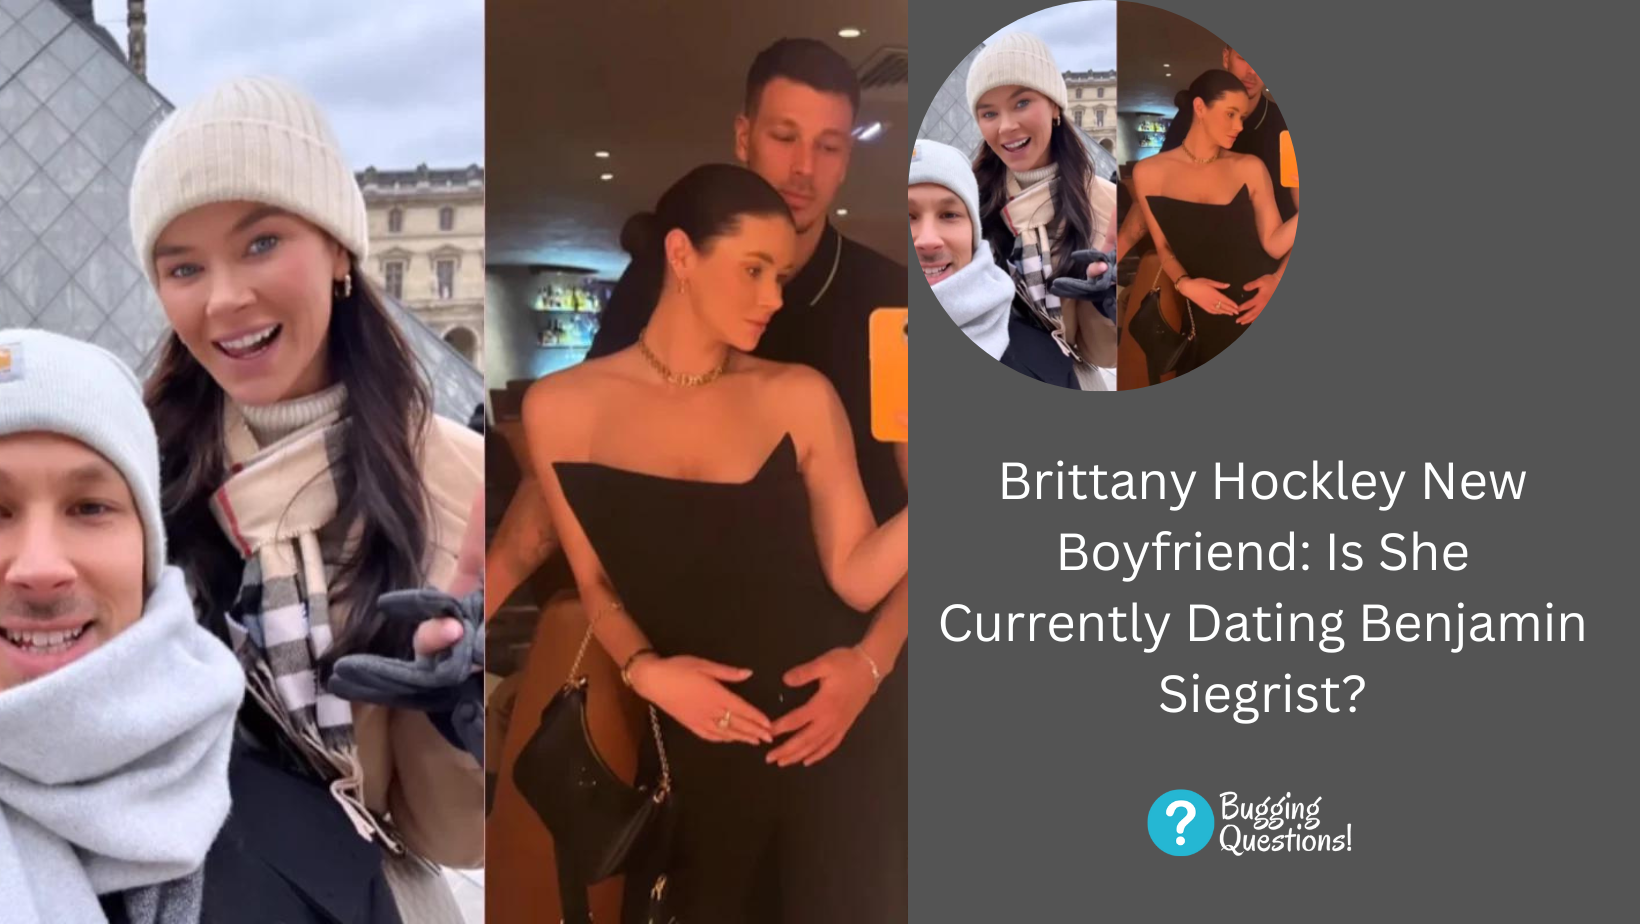 Brittany Hockley New Boyfriend: Is She Currently Dating Benjamin Siegrist?